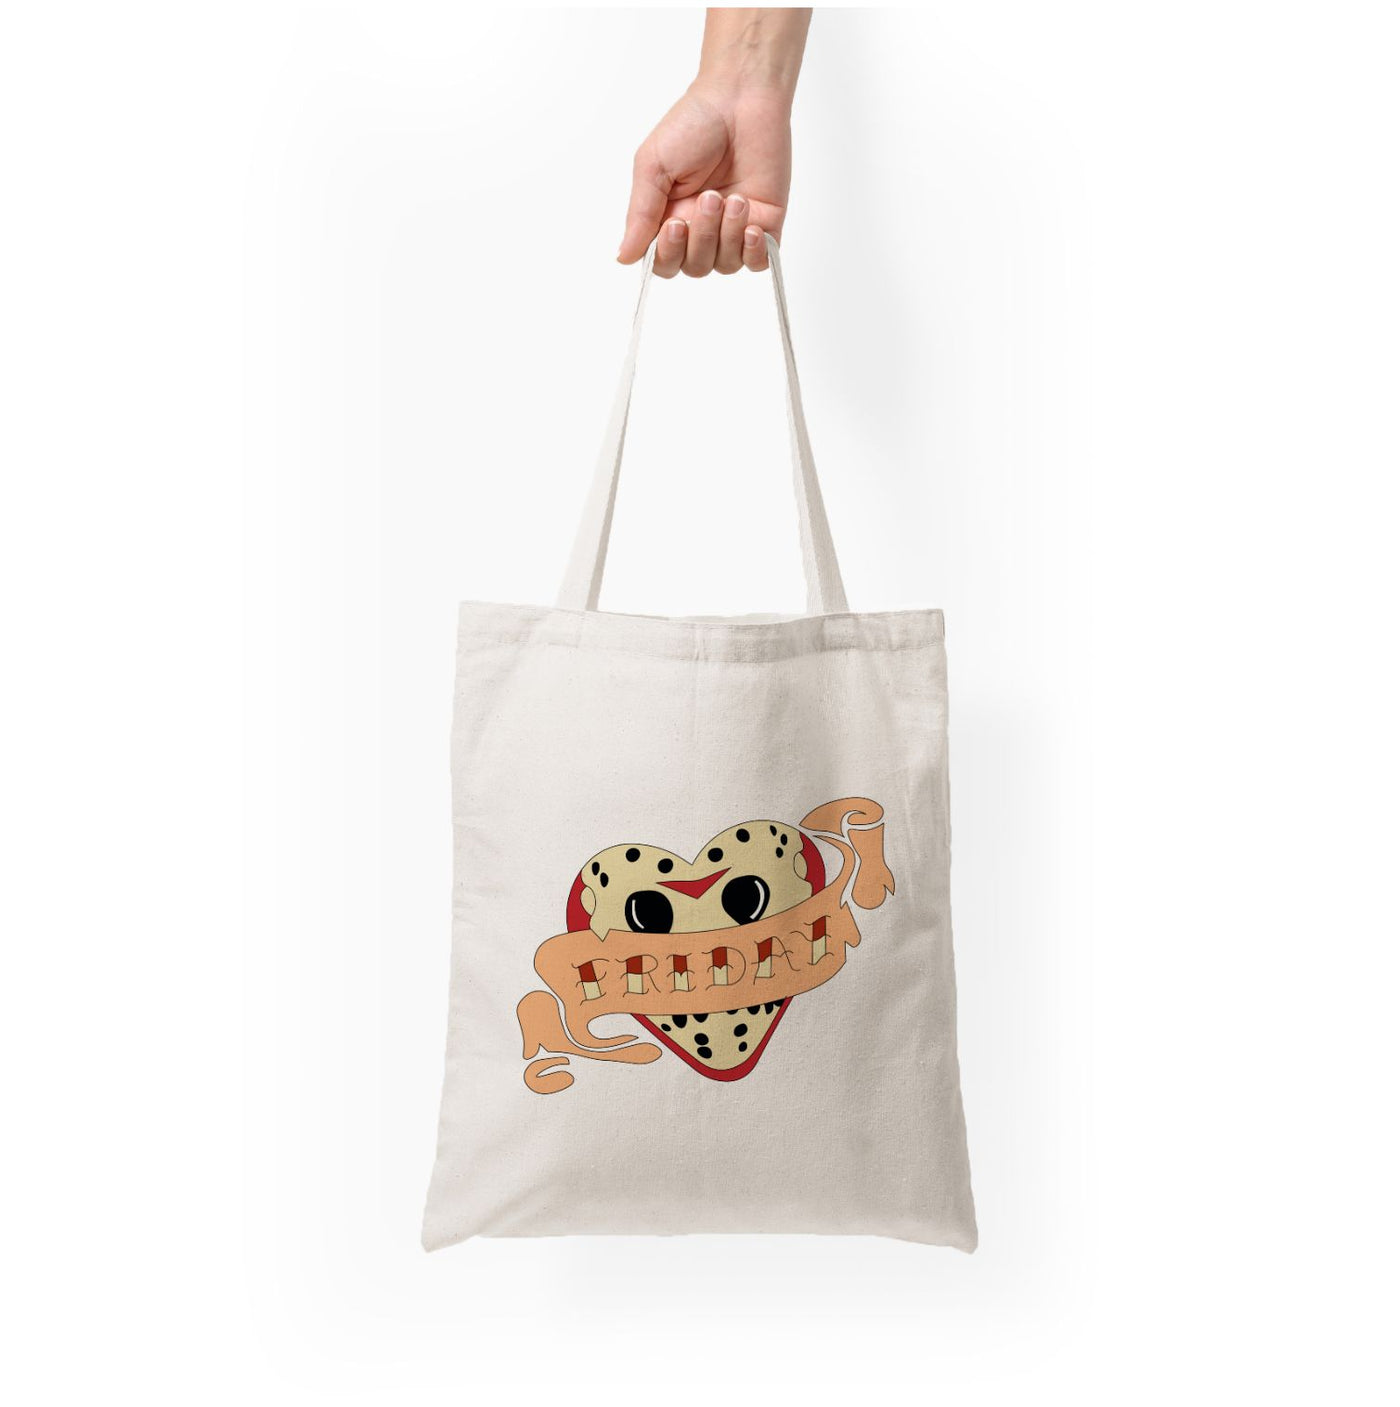 Friday - Friday The 13th Tote Bag